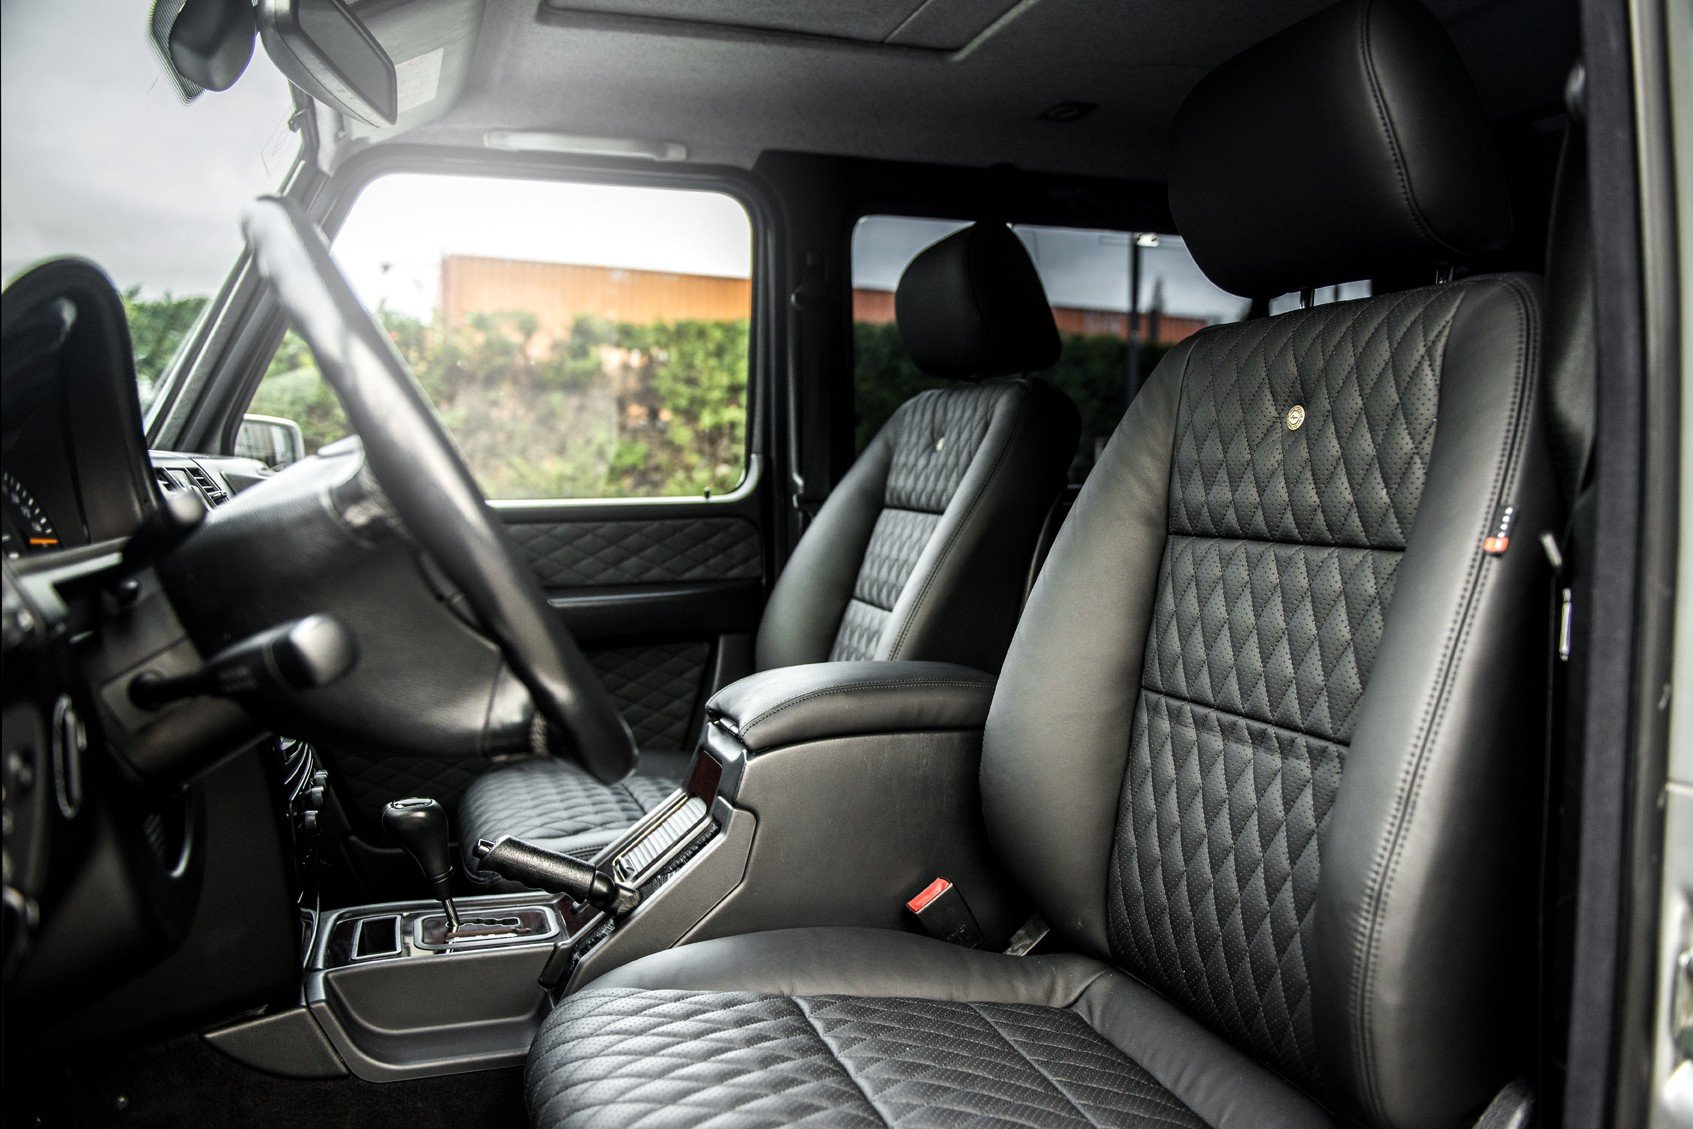 Mercedes G-Wagon 2 Door (1990-2006) Leather Interior by Chelsea Truck Company - Image 1475